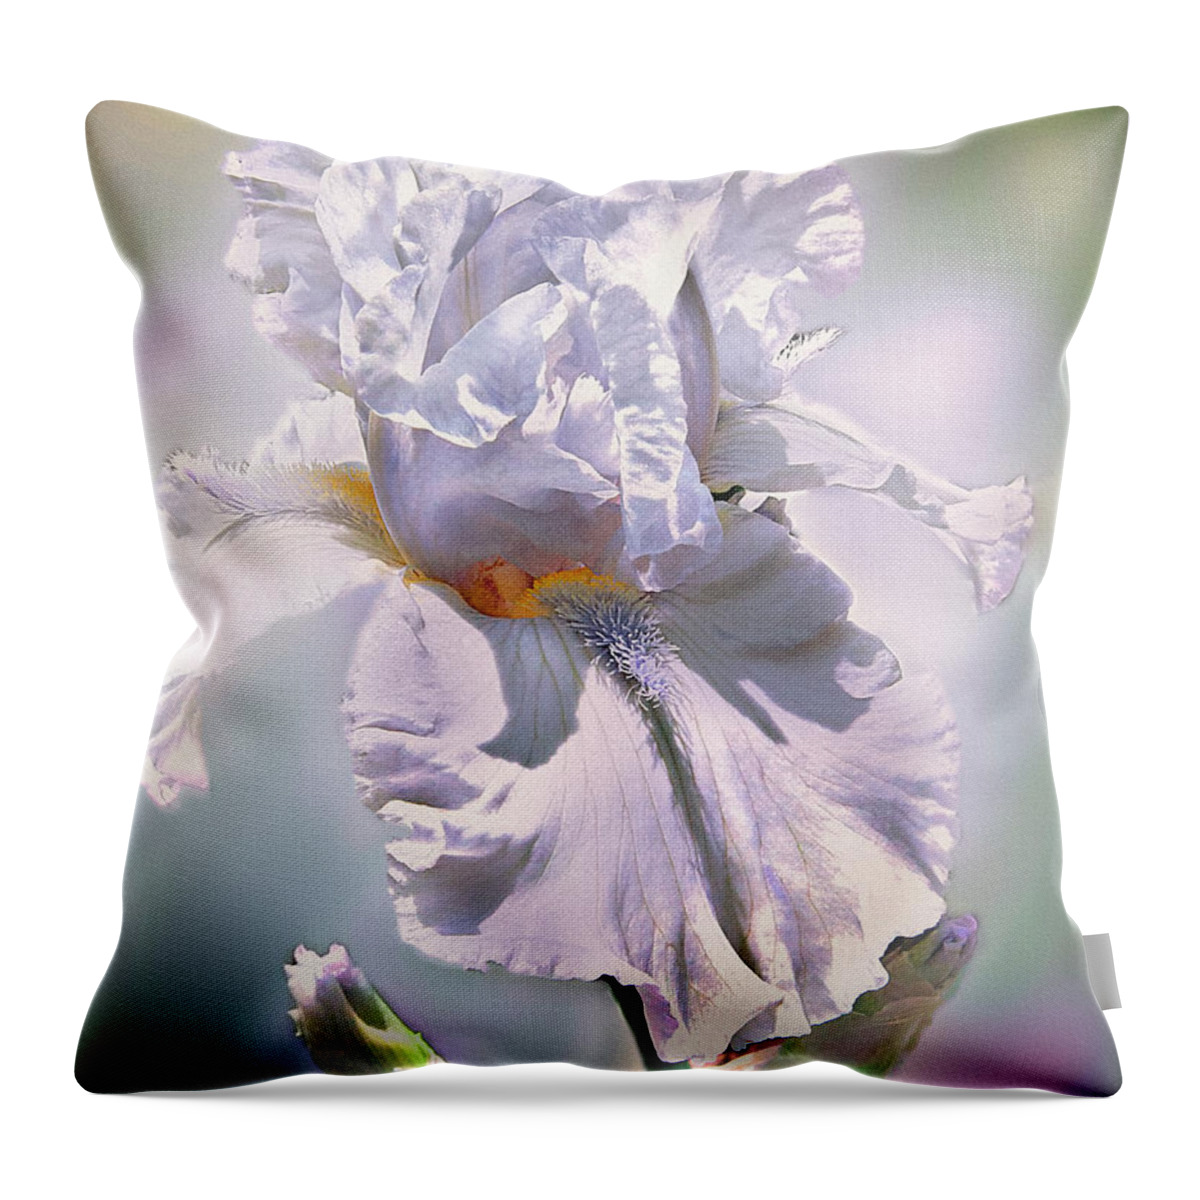 Bearded Iris Throw Pillow featuring the digital art Ice Queen by Mary Almond